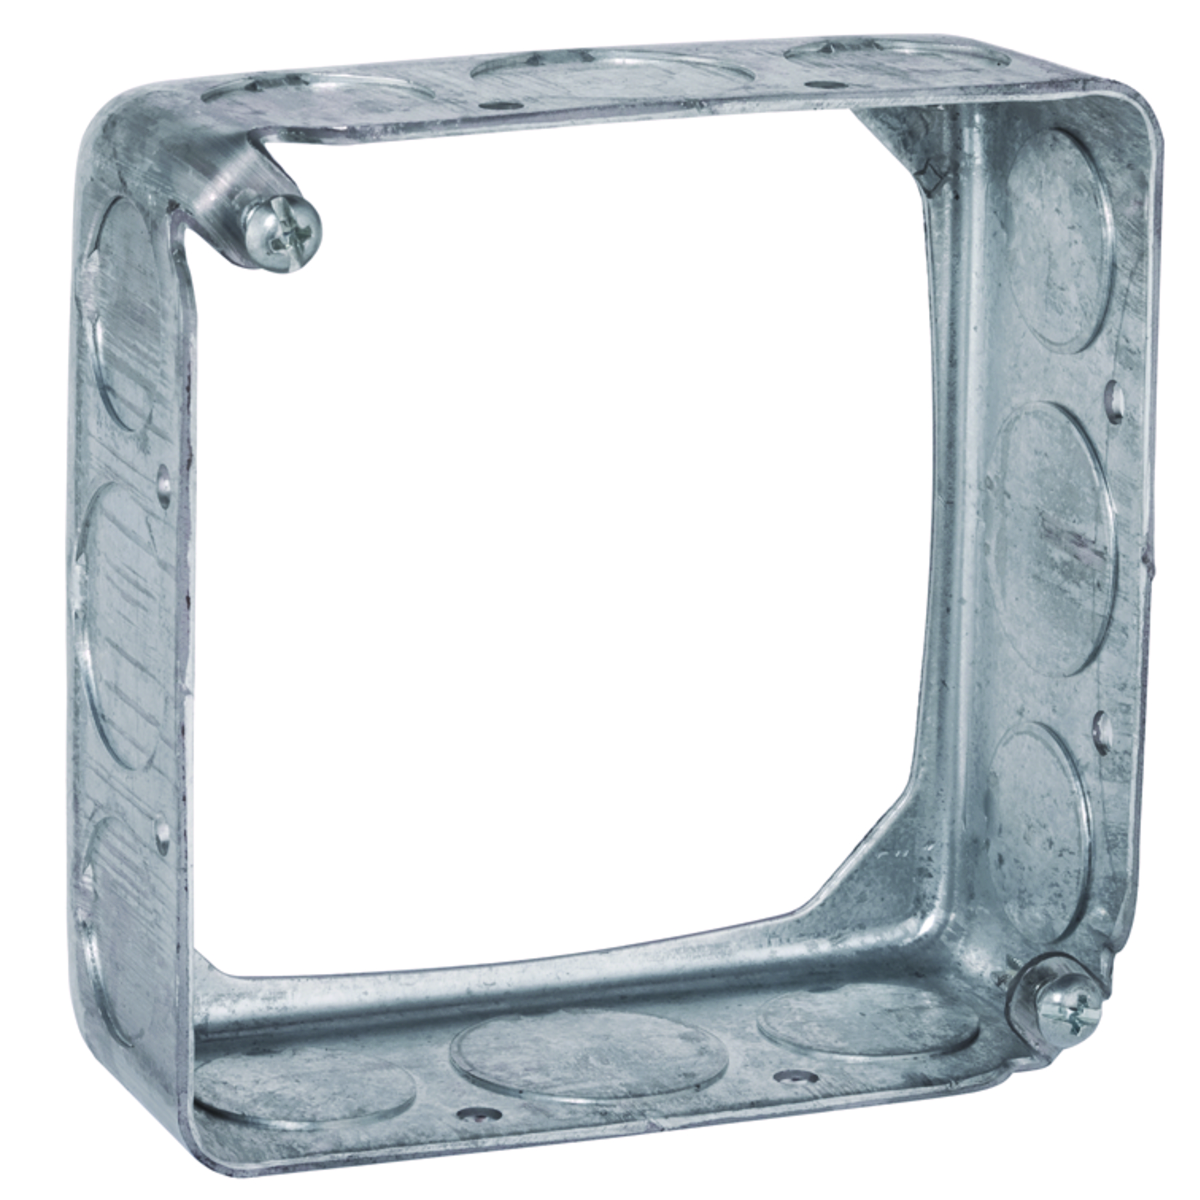 4 In. Square Thru-the-Wall Box, 1-1/2 In. Deep - Drawn with Conduit KO's